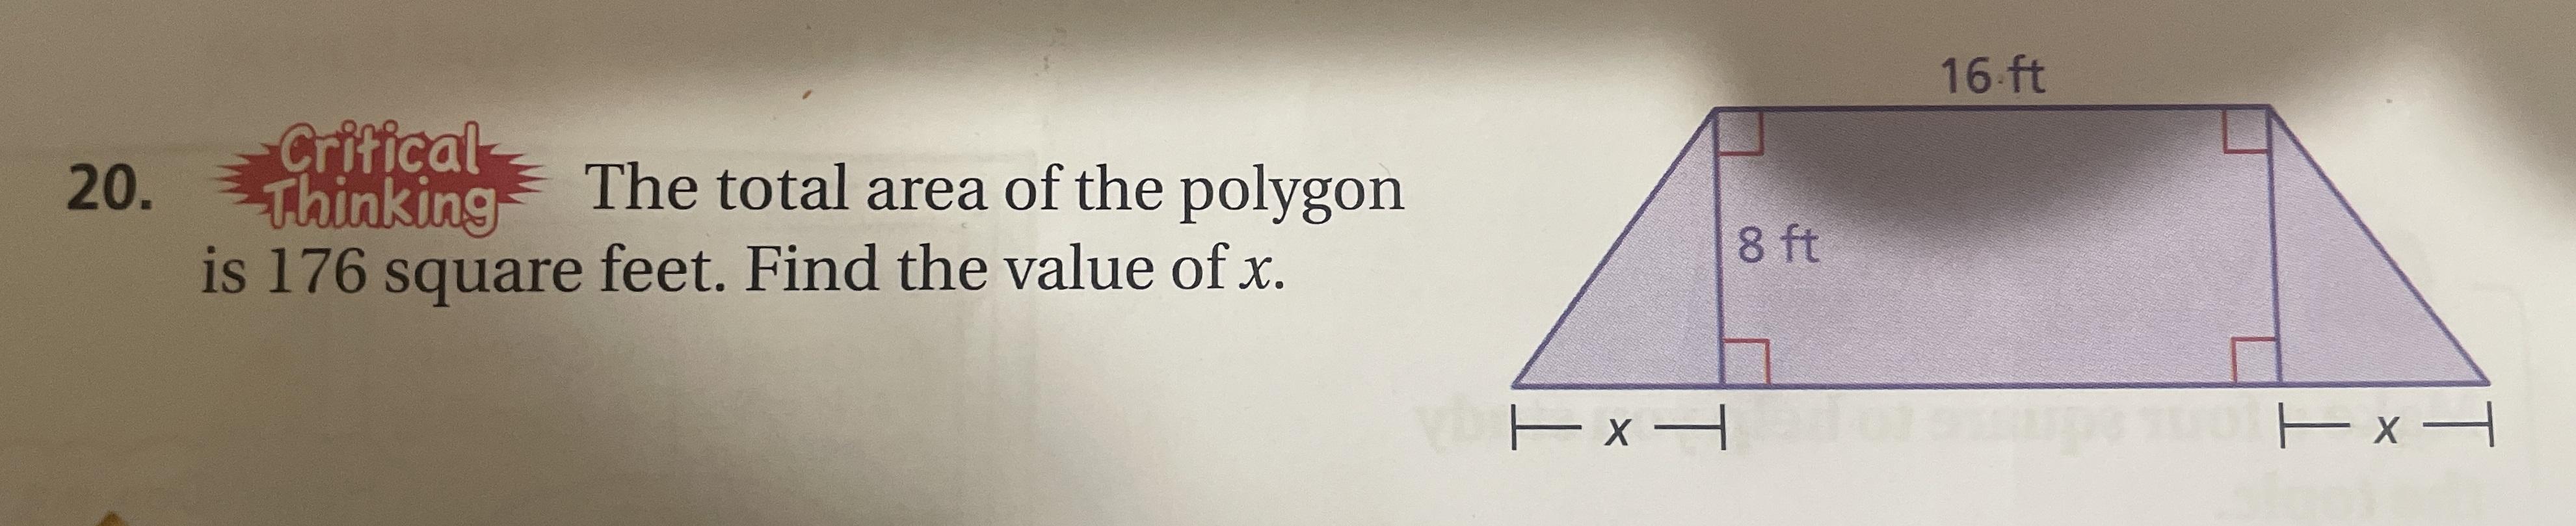 The Total Area Of A Polygon Is 176 Sq.ft. Find The Value Of X In The Drawing